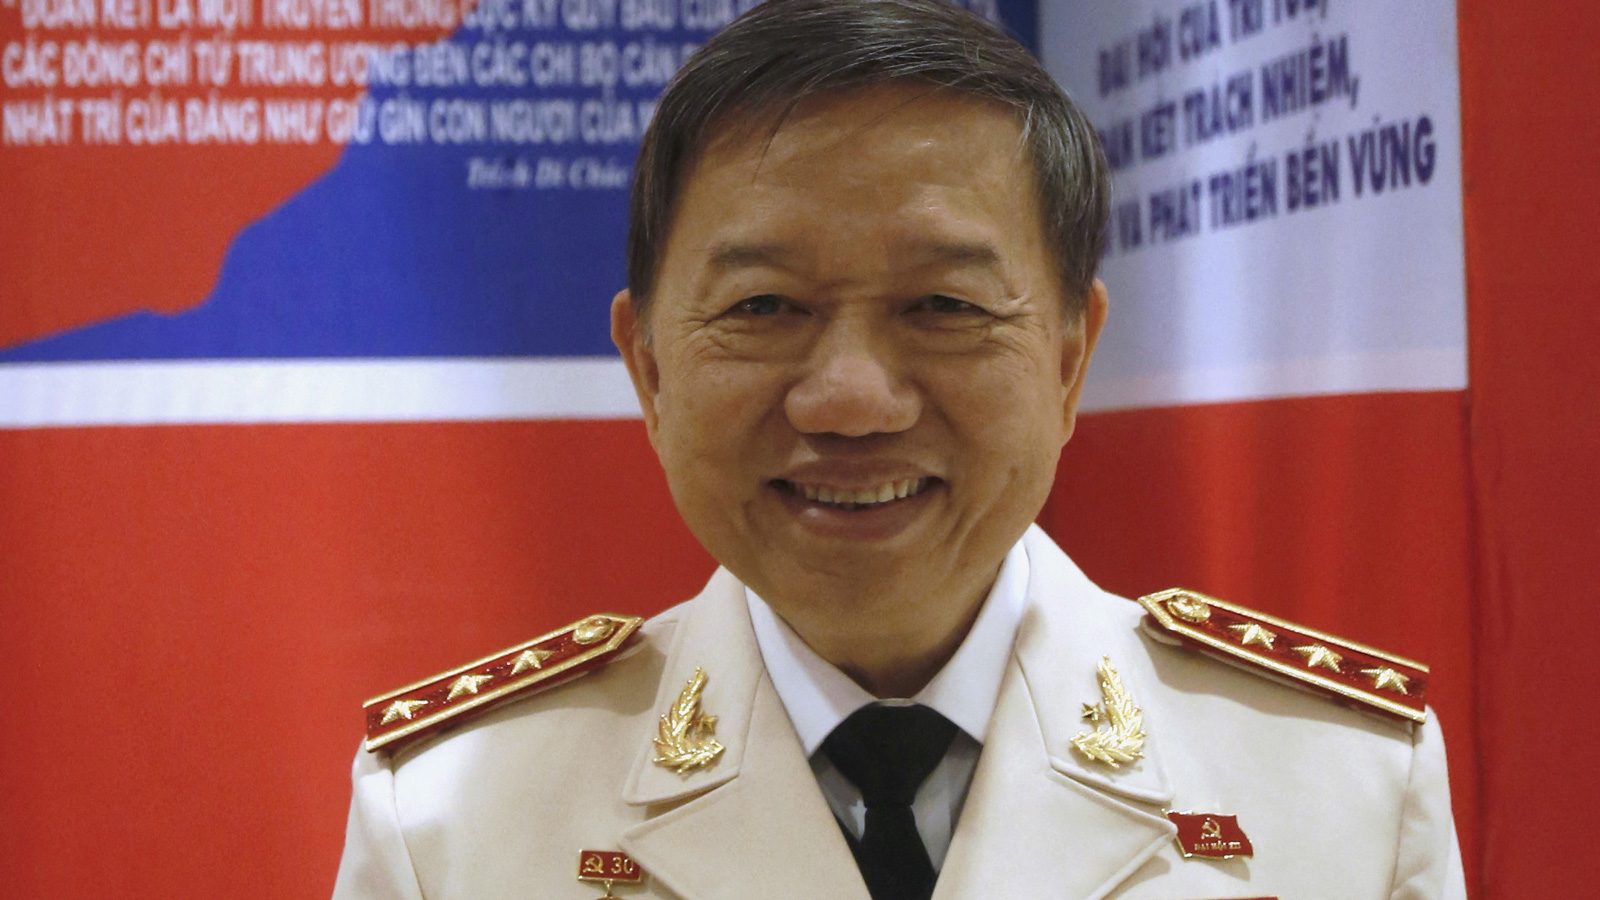 Vietnam lawmakers elect top policeman as country’s new president